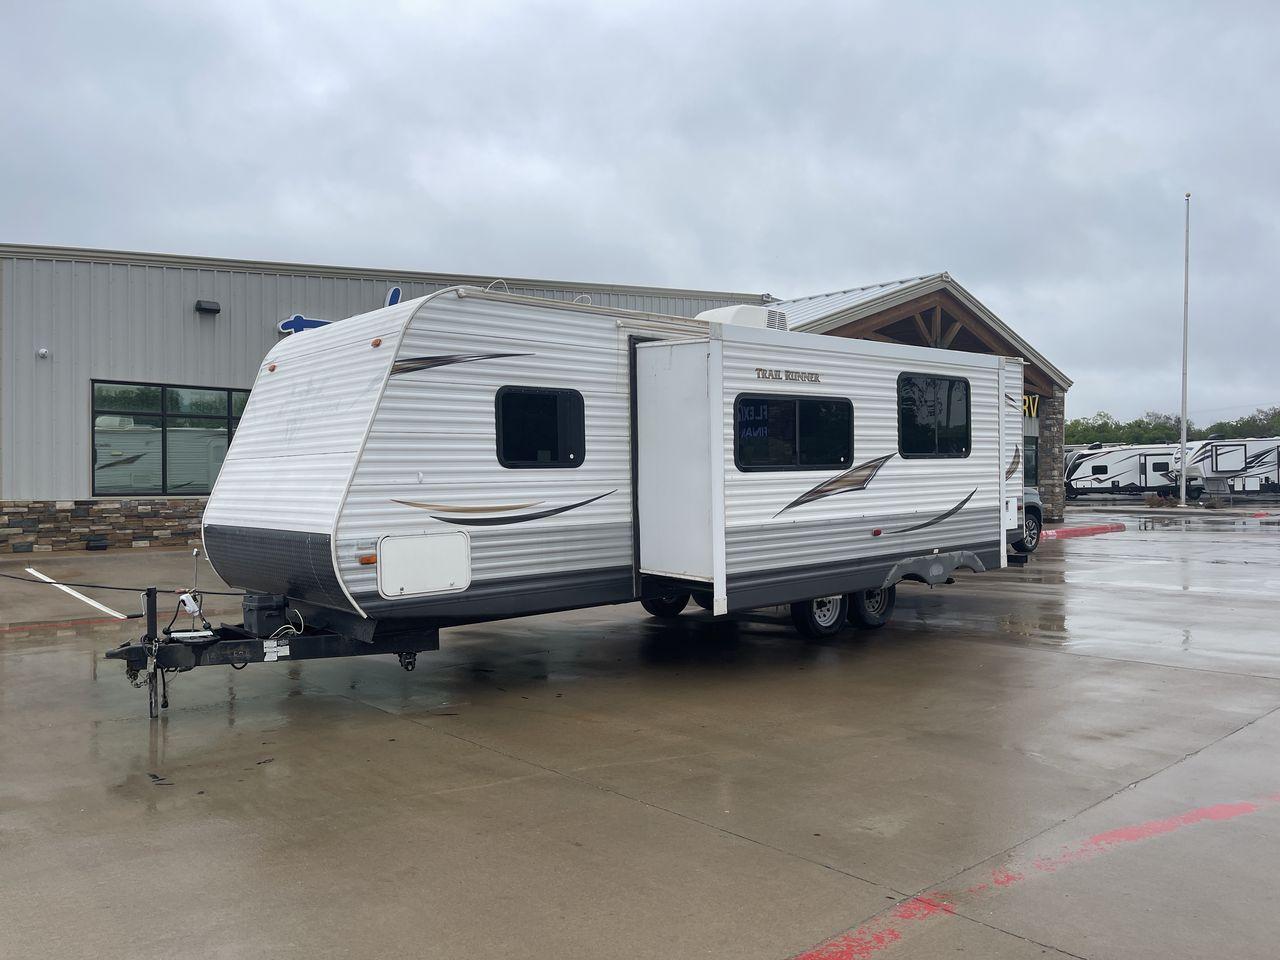 2013 TRAIL RUNNER 29FQBS (5SFEB3228DE) , Length: 32.33 ft. | Dry Weight: 6,724 lbs. | Slides: 1 transmission, located at 4319 N Main Street, Cleburne, TX, 76033, (817) 221-0660, 32.435829, -97.384178 - This 2013 Trail Runner 29FQBS is a single-slide travel trailer measuring approximately 32.33 feet long. It has a dry weight of 6,724 lbs. and a carrying capacity of 2,276 lbs. It also has a manageable hitch weight of 738 lbs. As you enter the camper, you will find the kitchen section immediately to - Photo #23